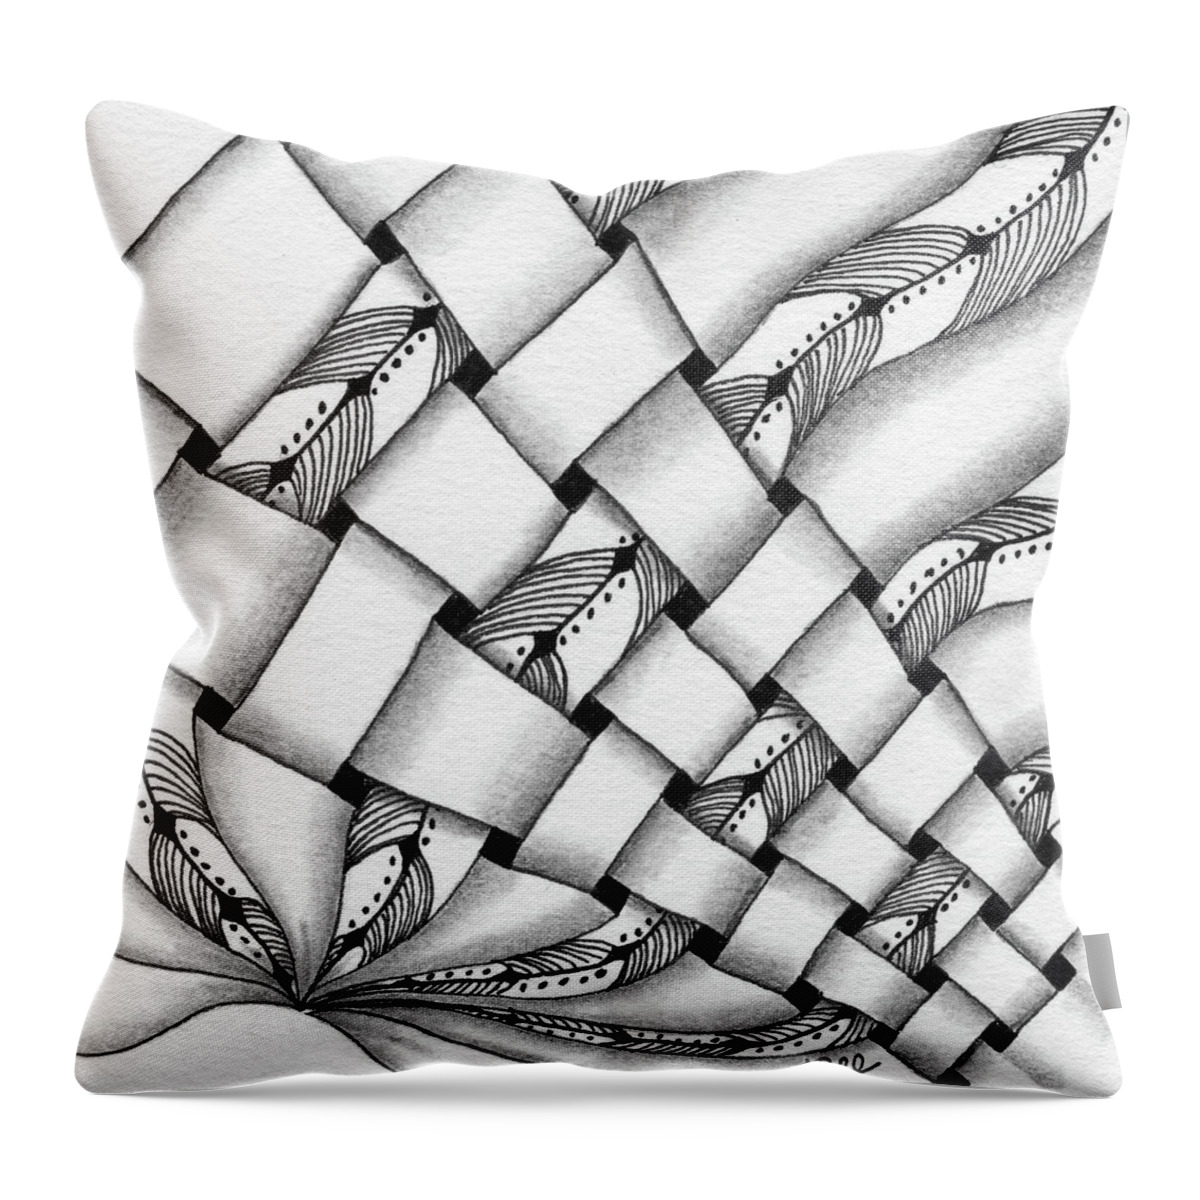 Zentangle Throw Pillow featuring the drawing Interwoven by Jan Steinle